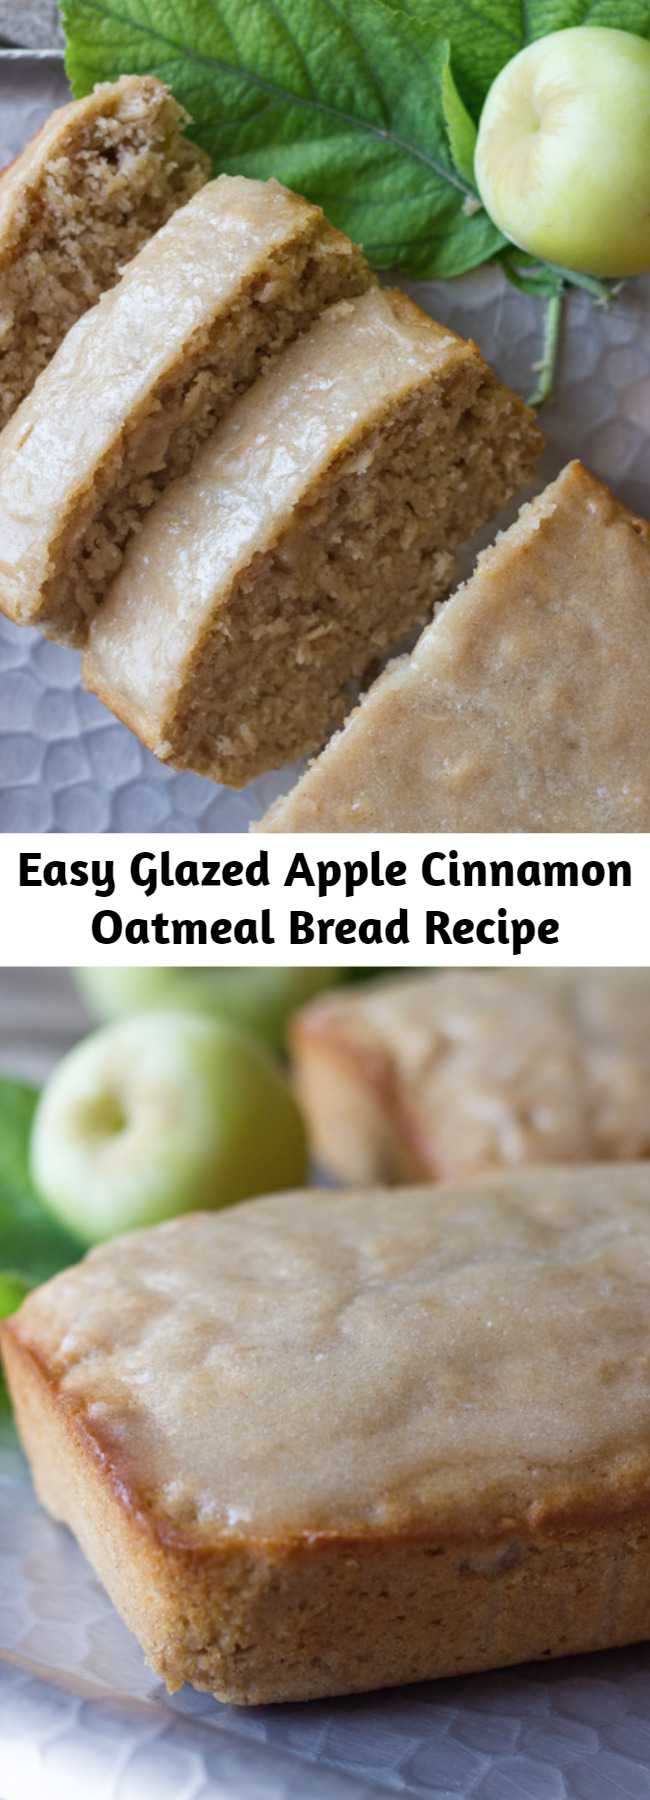 Easy Glazed Apple Cinnamon Oatmeal Bread Recipe - Apple cinnamon oatmeal bread is slightly sweet, has nice chunks of apples, and the oats give it a great consistency. This makes a hearty, tasty breakfast.